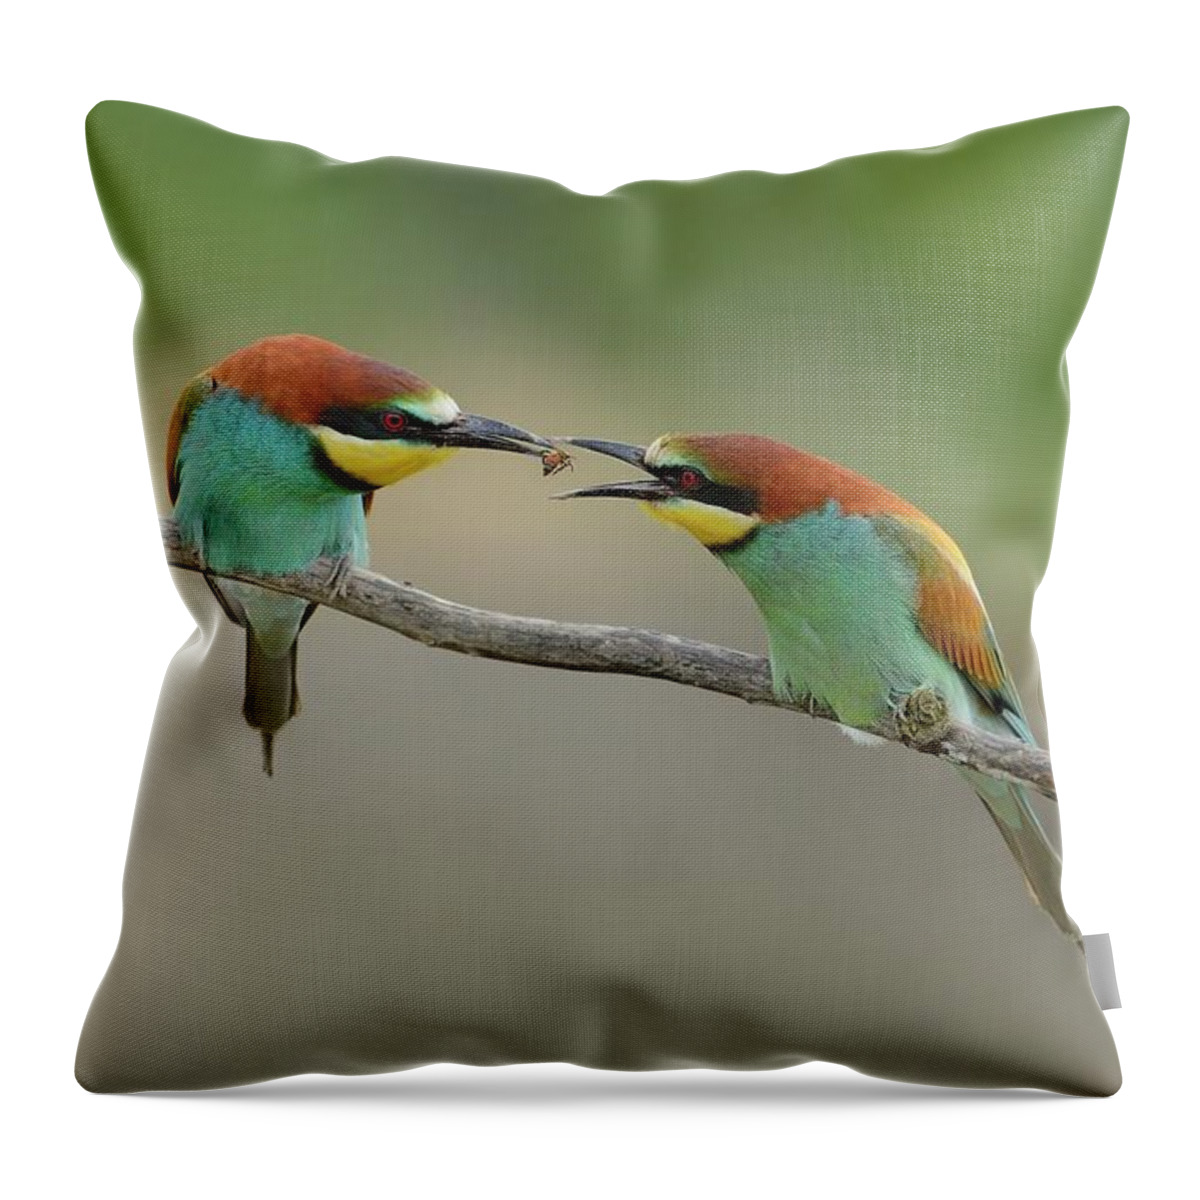 Animal Themes Throw Pillow featuring the photograph The Gift by Marco Pozzi Photographer